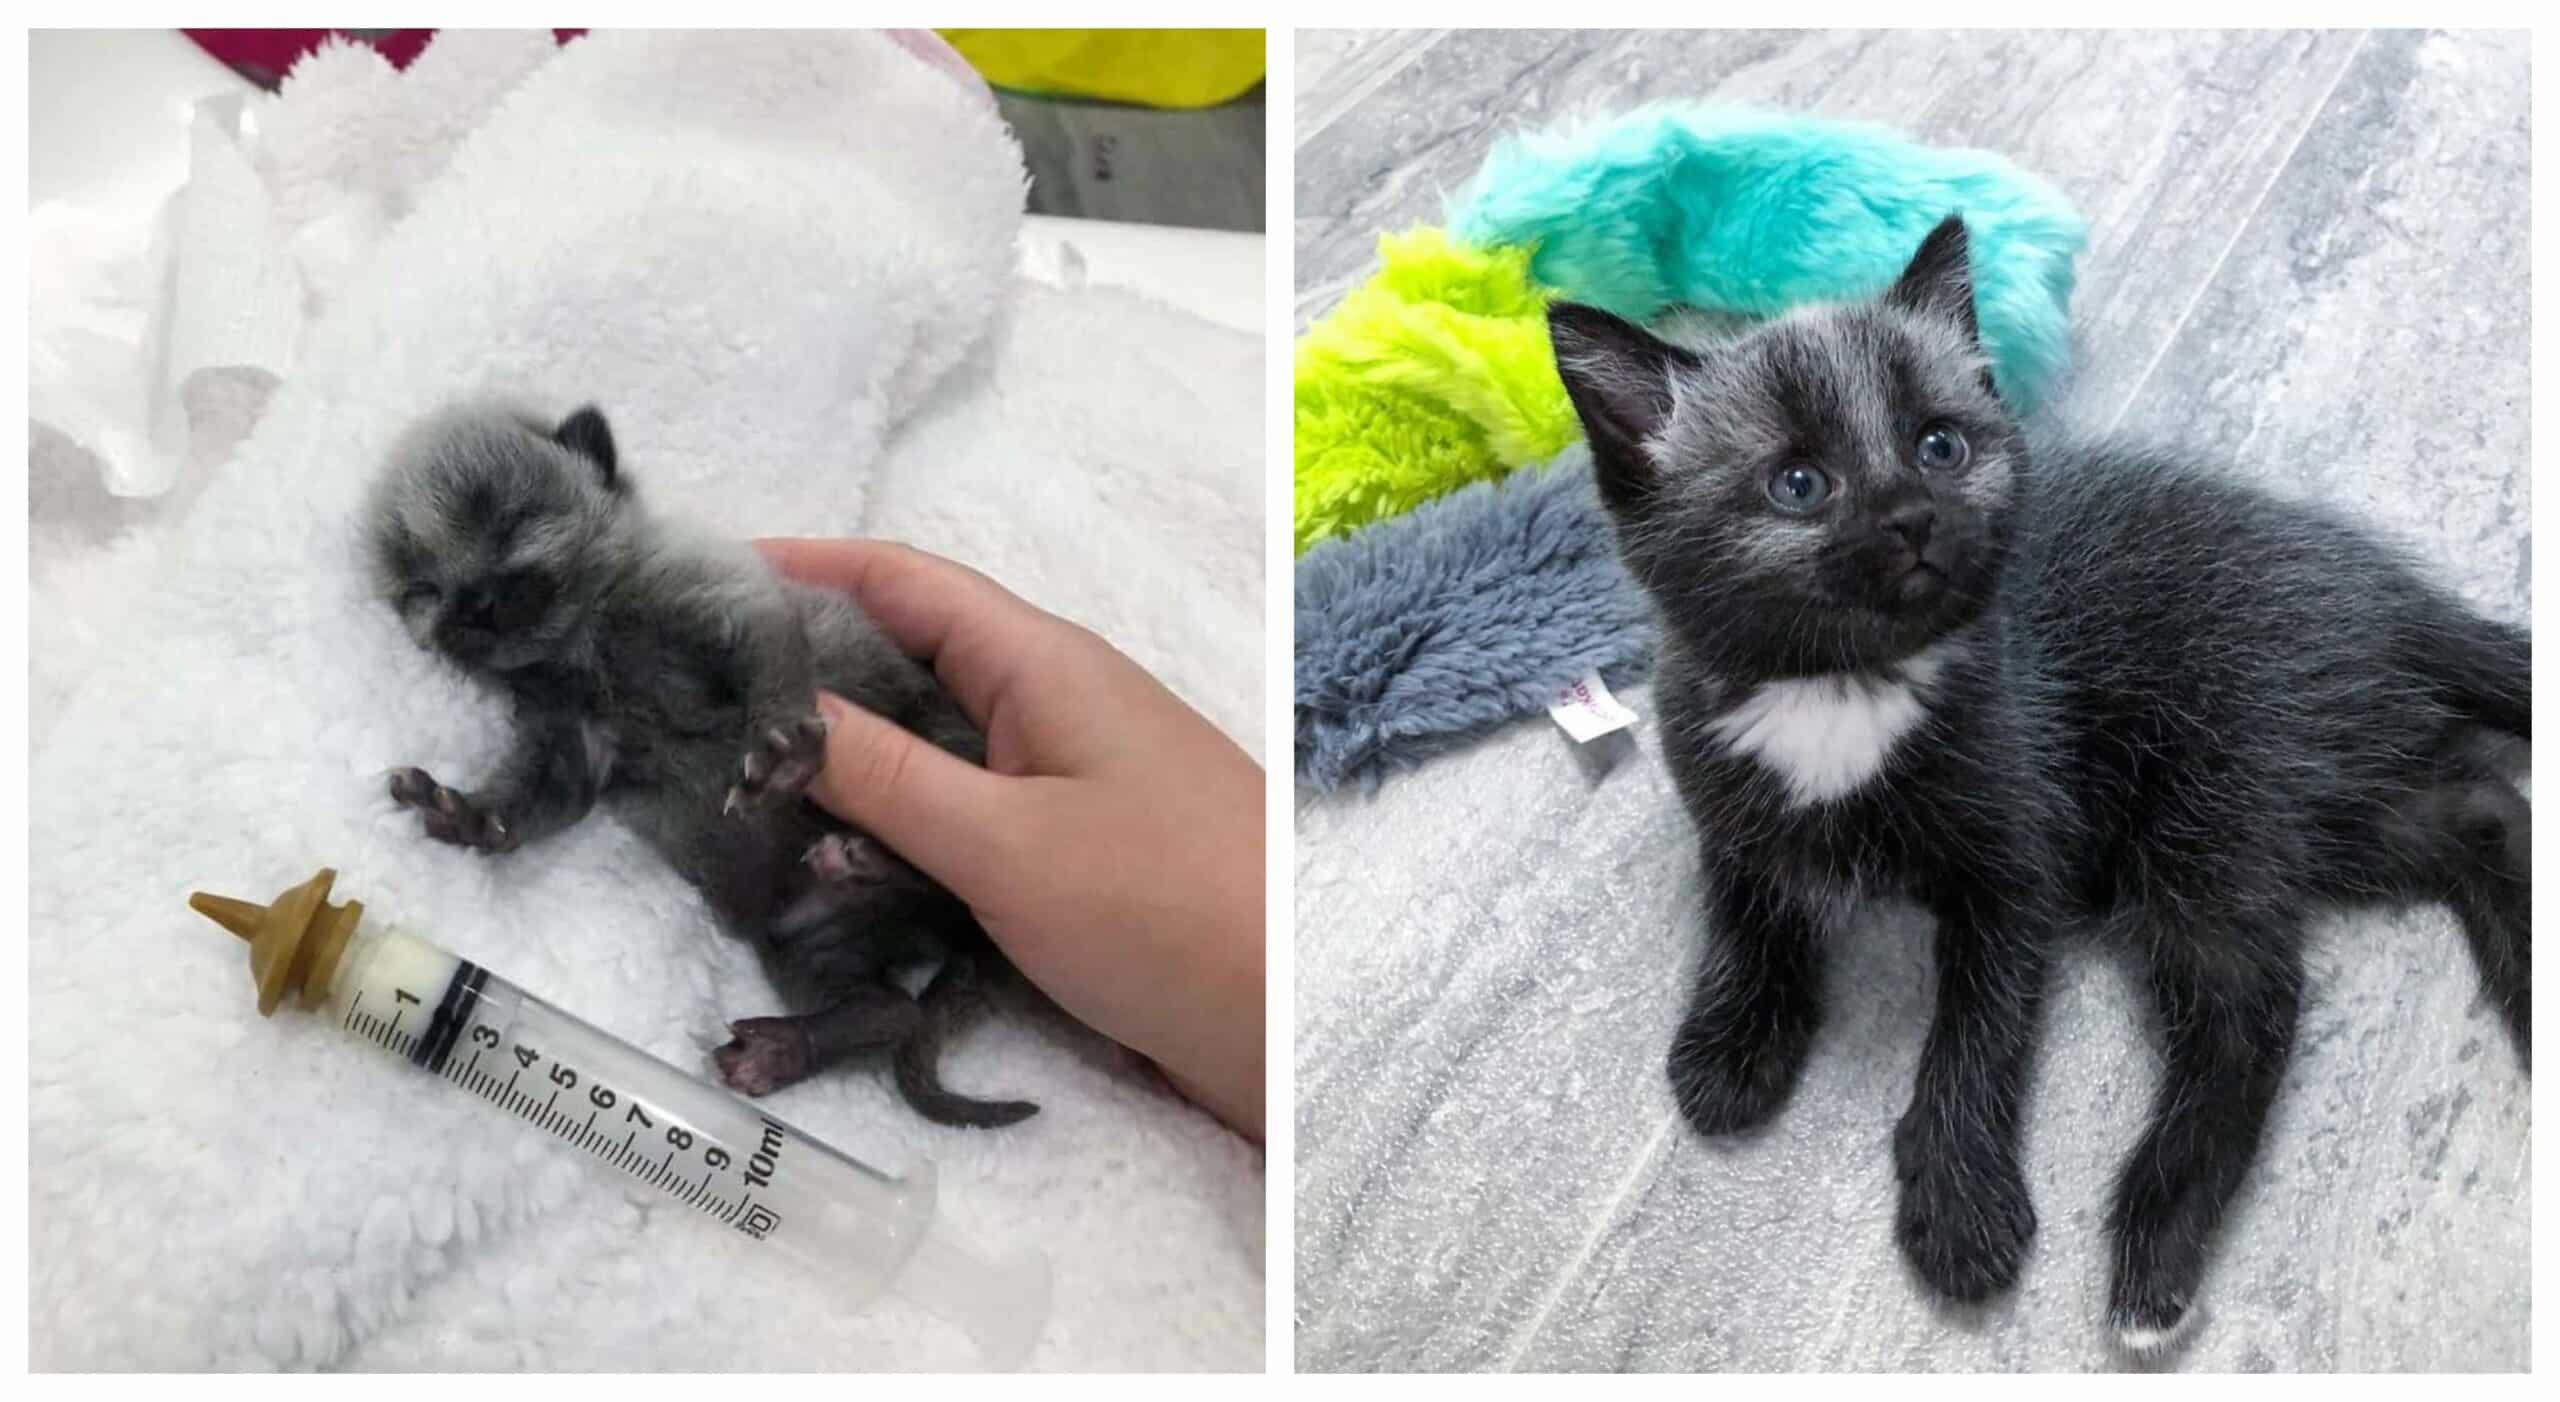 An abandoned kitten was found on the road with a beautiful coat